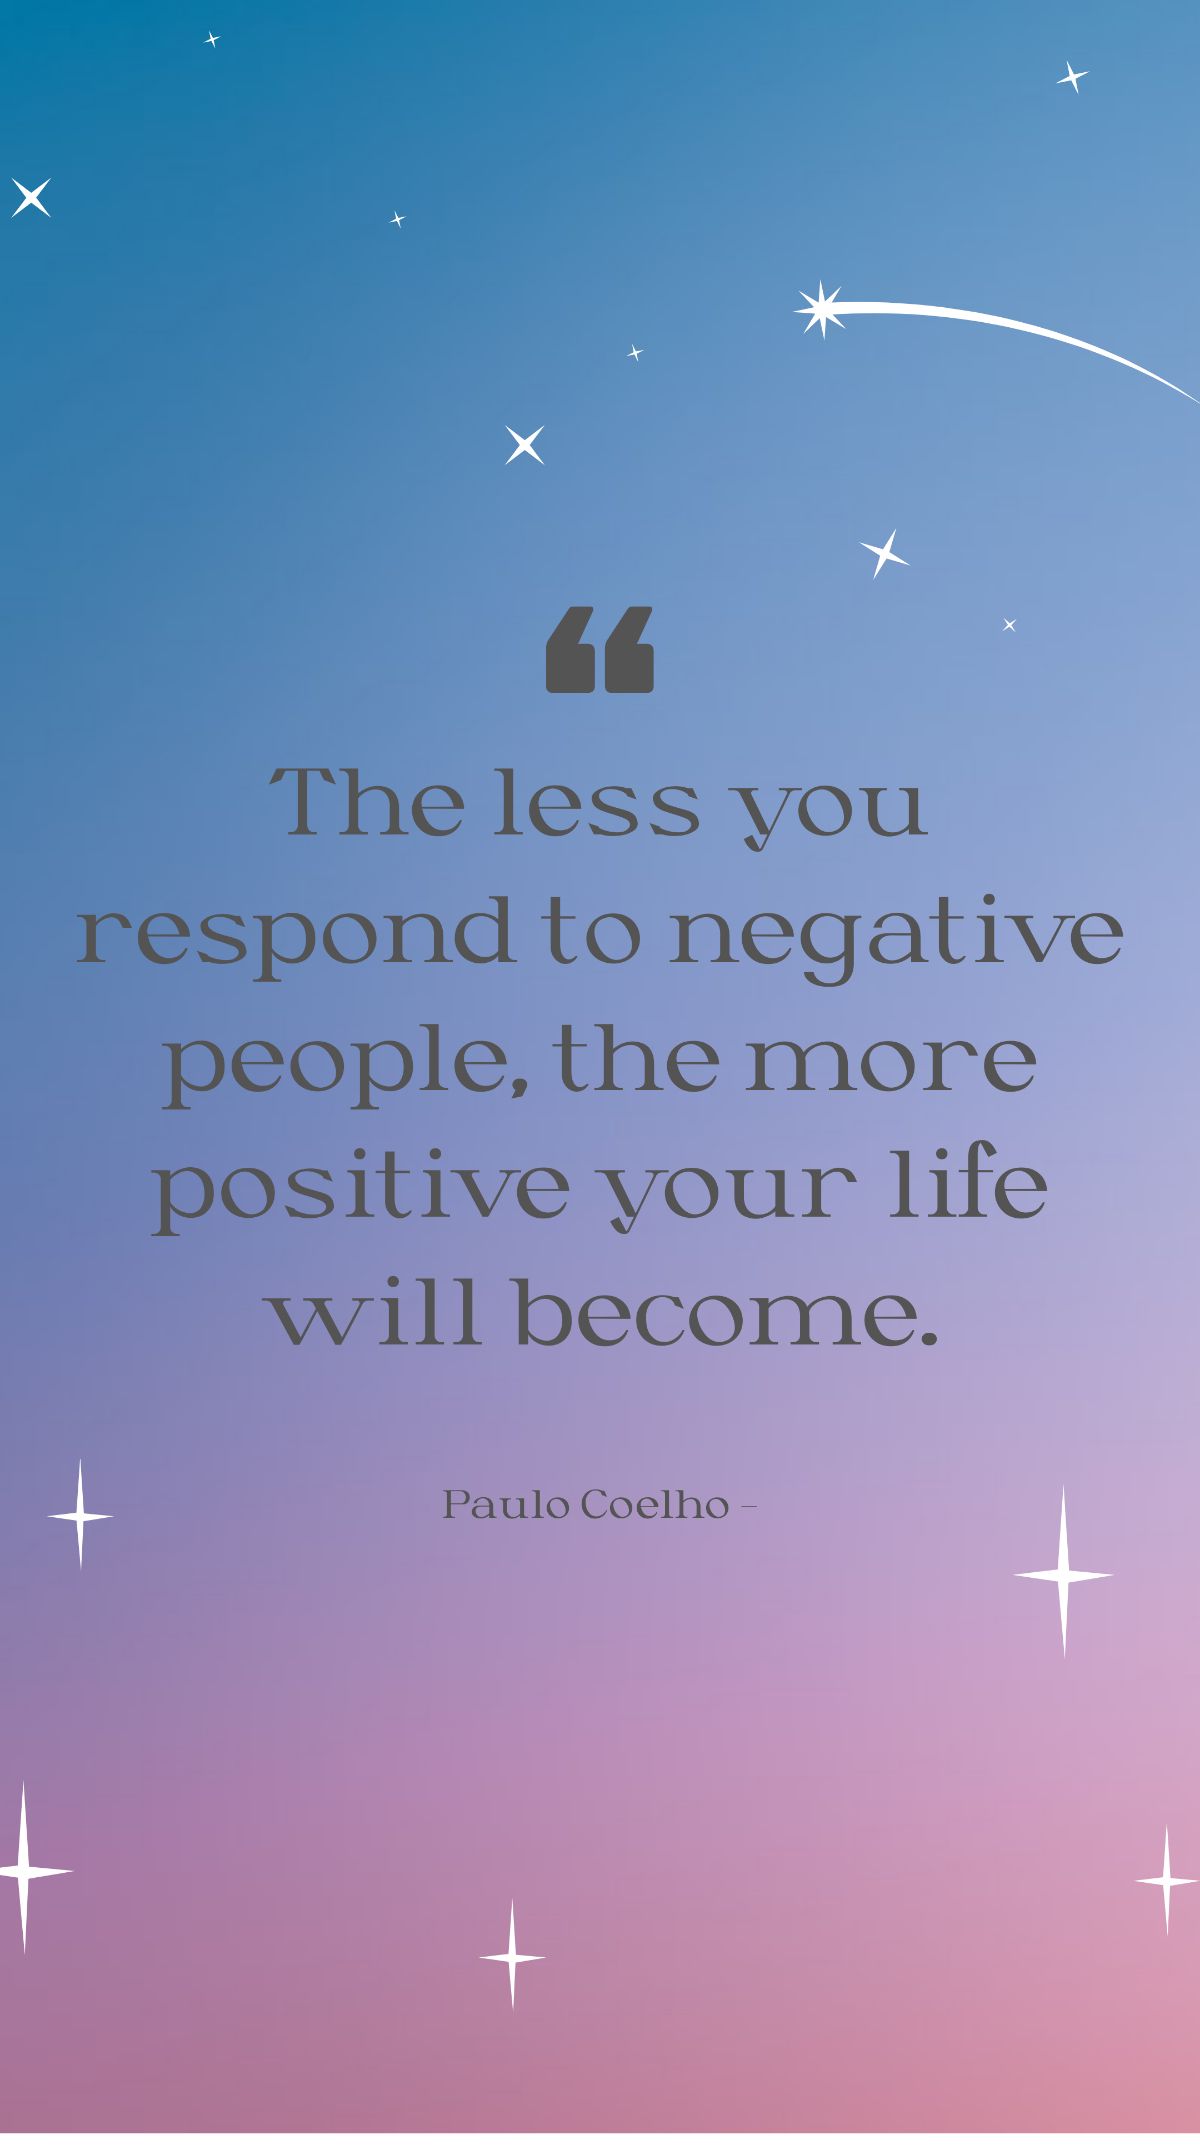 Paulo Coelho - The less you respond to negative people, the more positive your life will become. Template